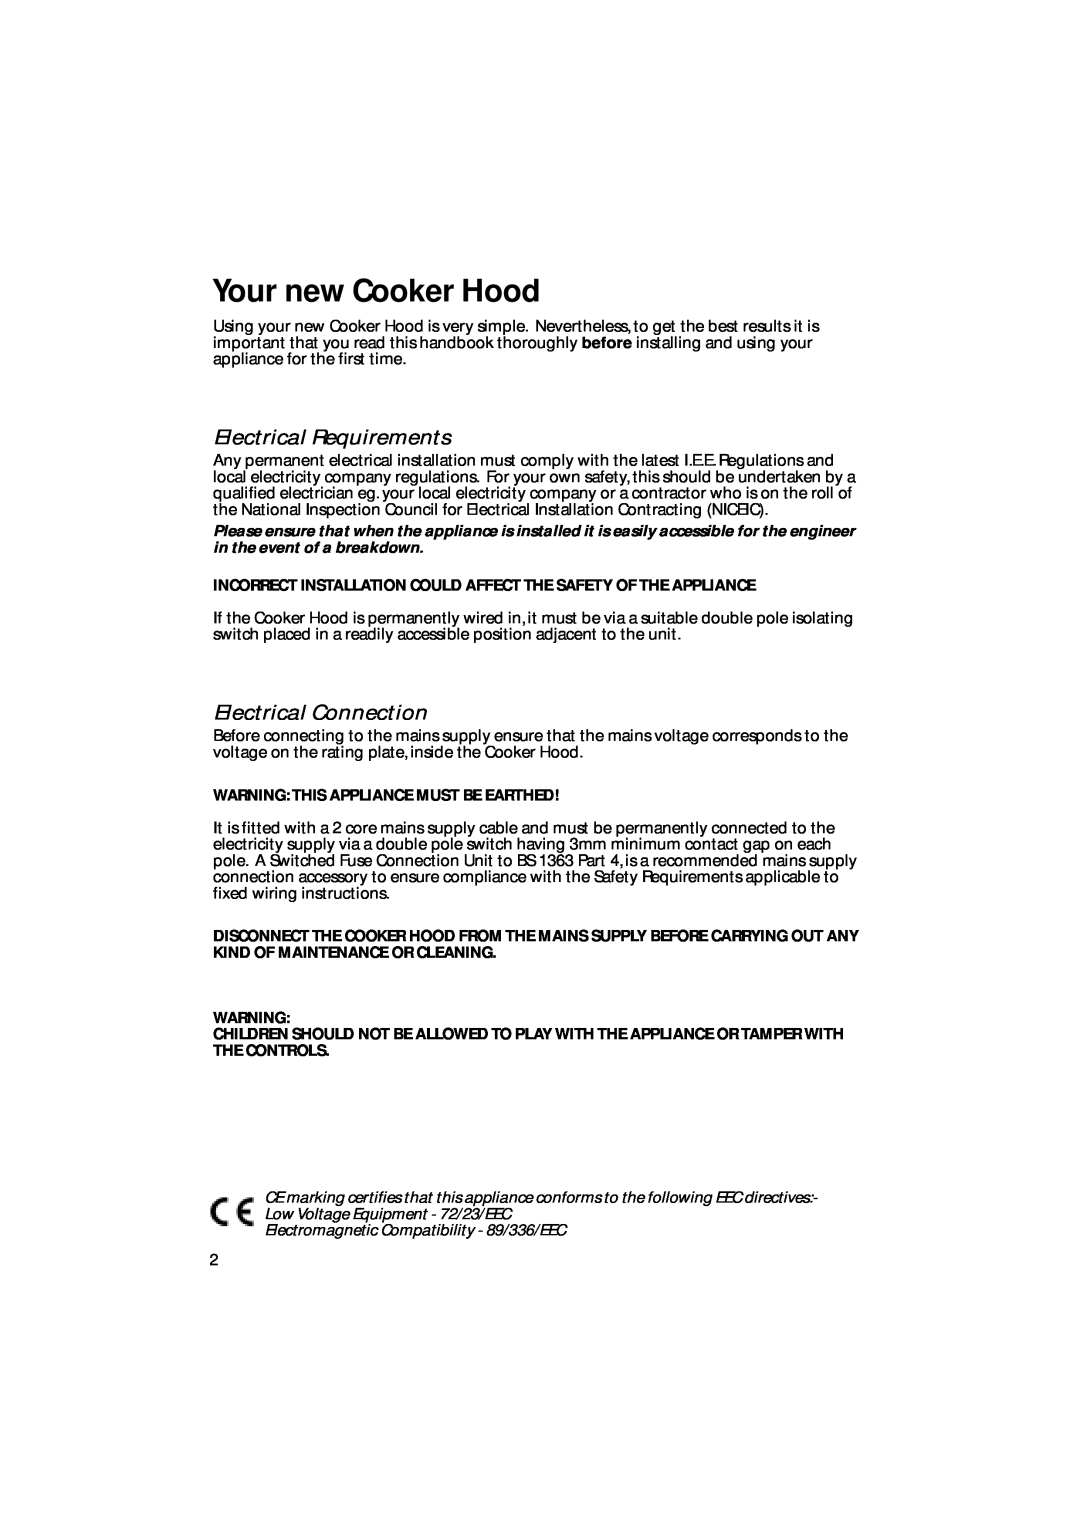 Creda CRC95 Your new Cooker Hood, Electrical Requirements, Electrical Connection, Warning This Appliance Must Be Earthed 